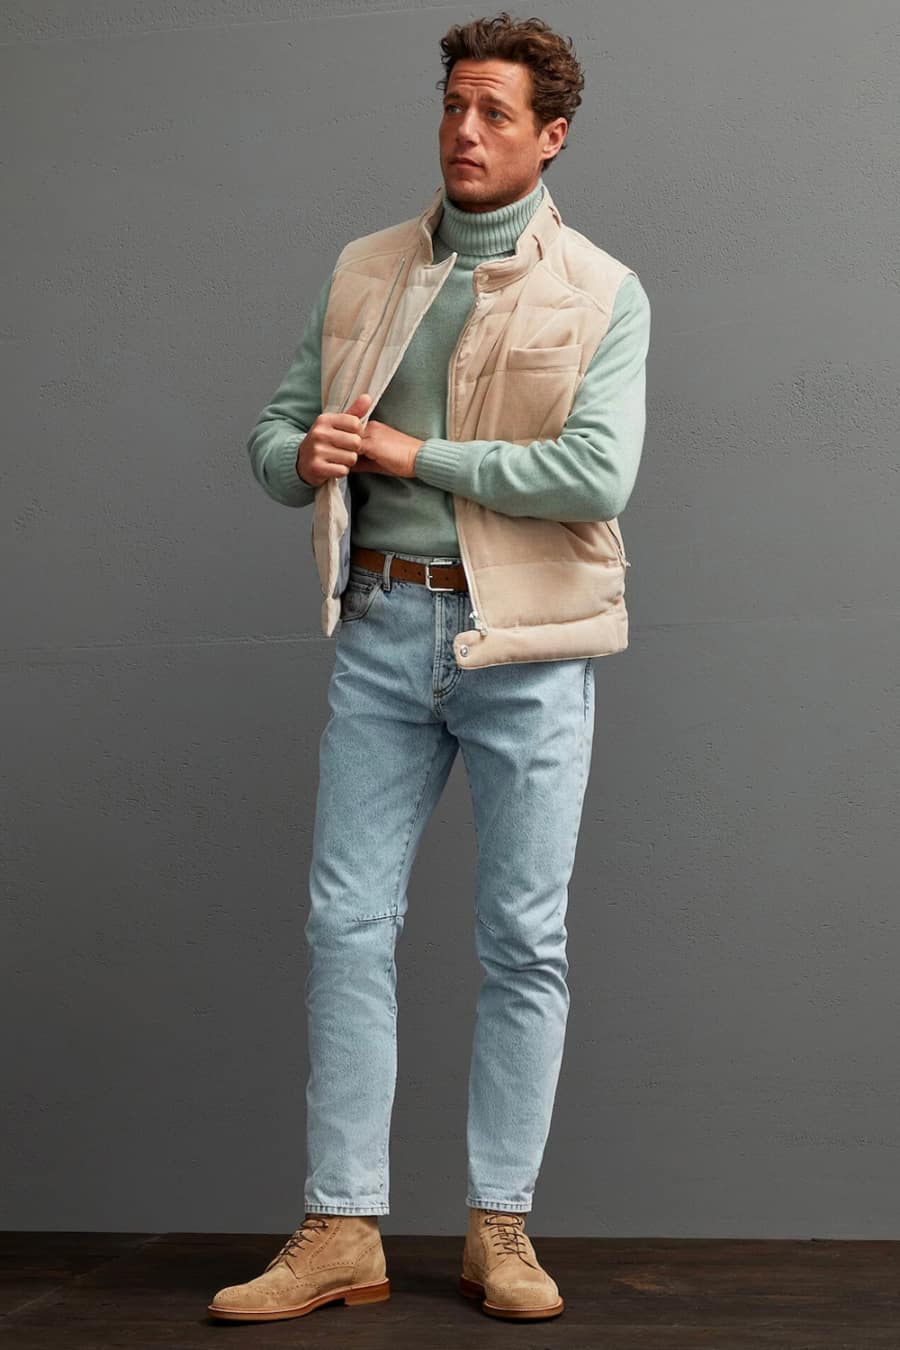 Men's light blue wash jeans, green turtleneck, gilet and suede boots outfit